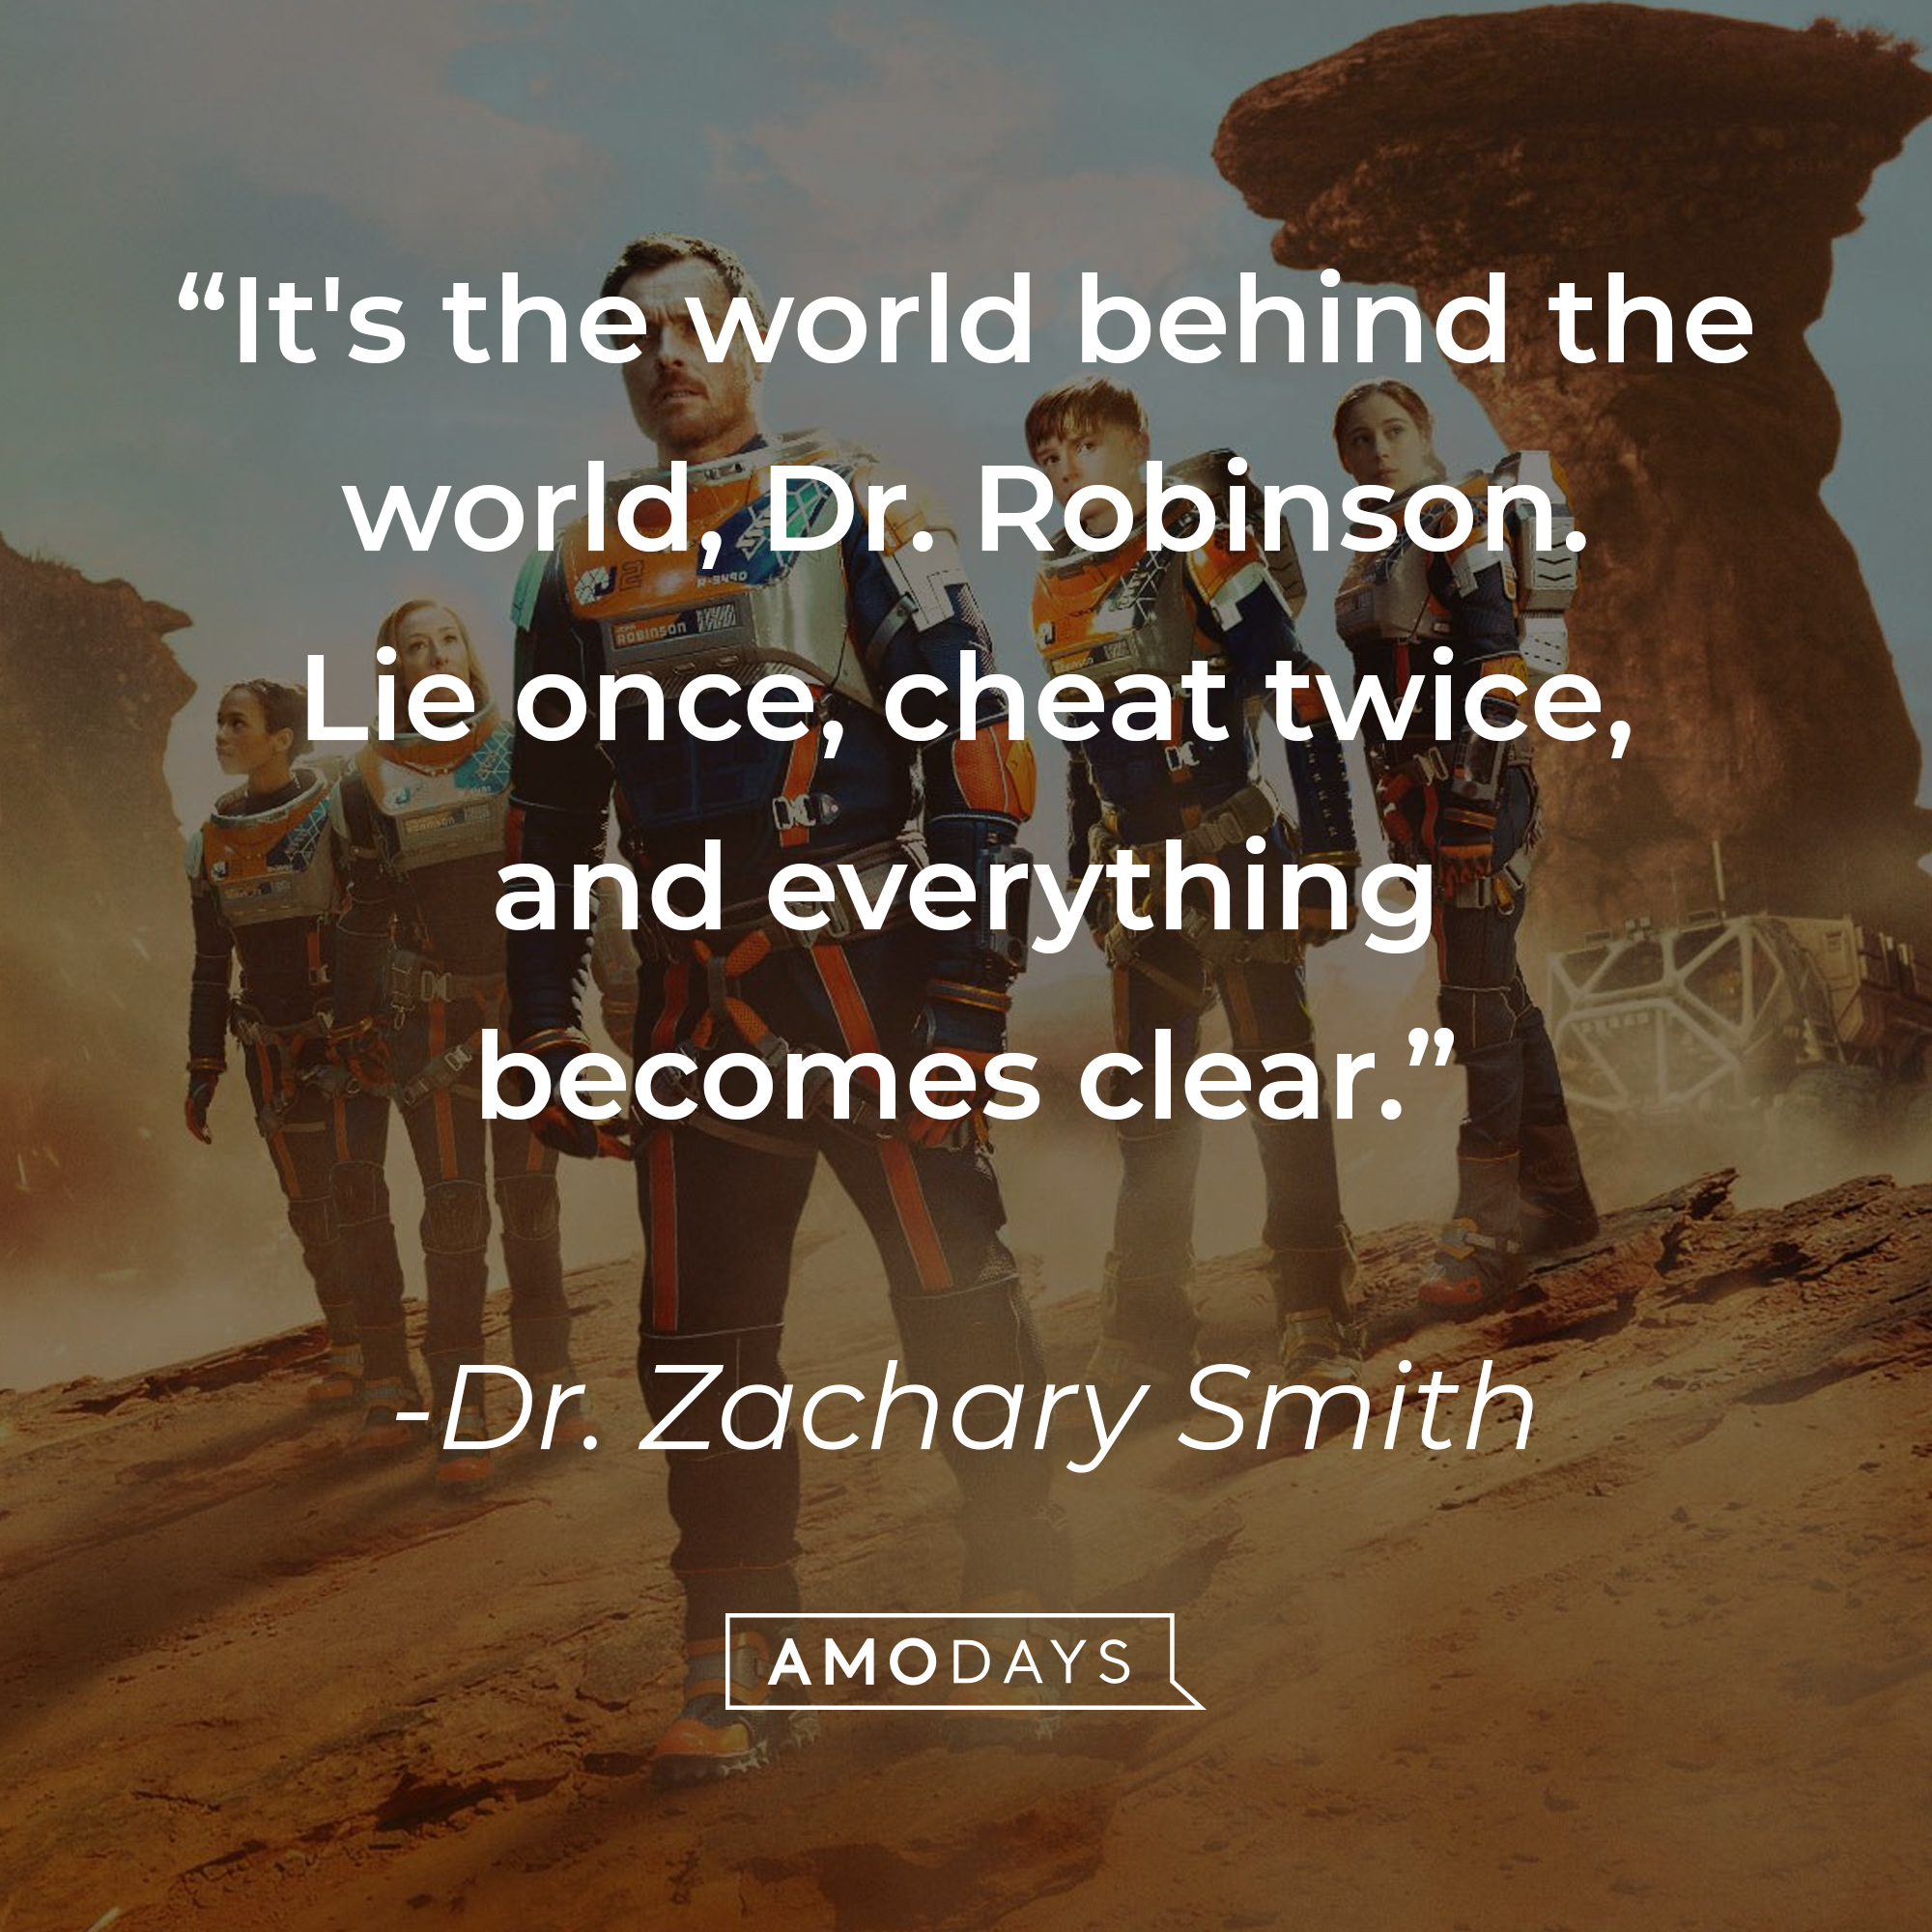 Dr. Zachary Smith’s quote:  "It's the world behind the world, Dr. Robinson. Lie once, cheat twice, and everything becomes clear." | Image: Facebook.com/lostinspacenetflix